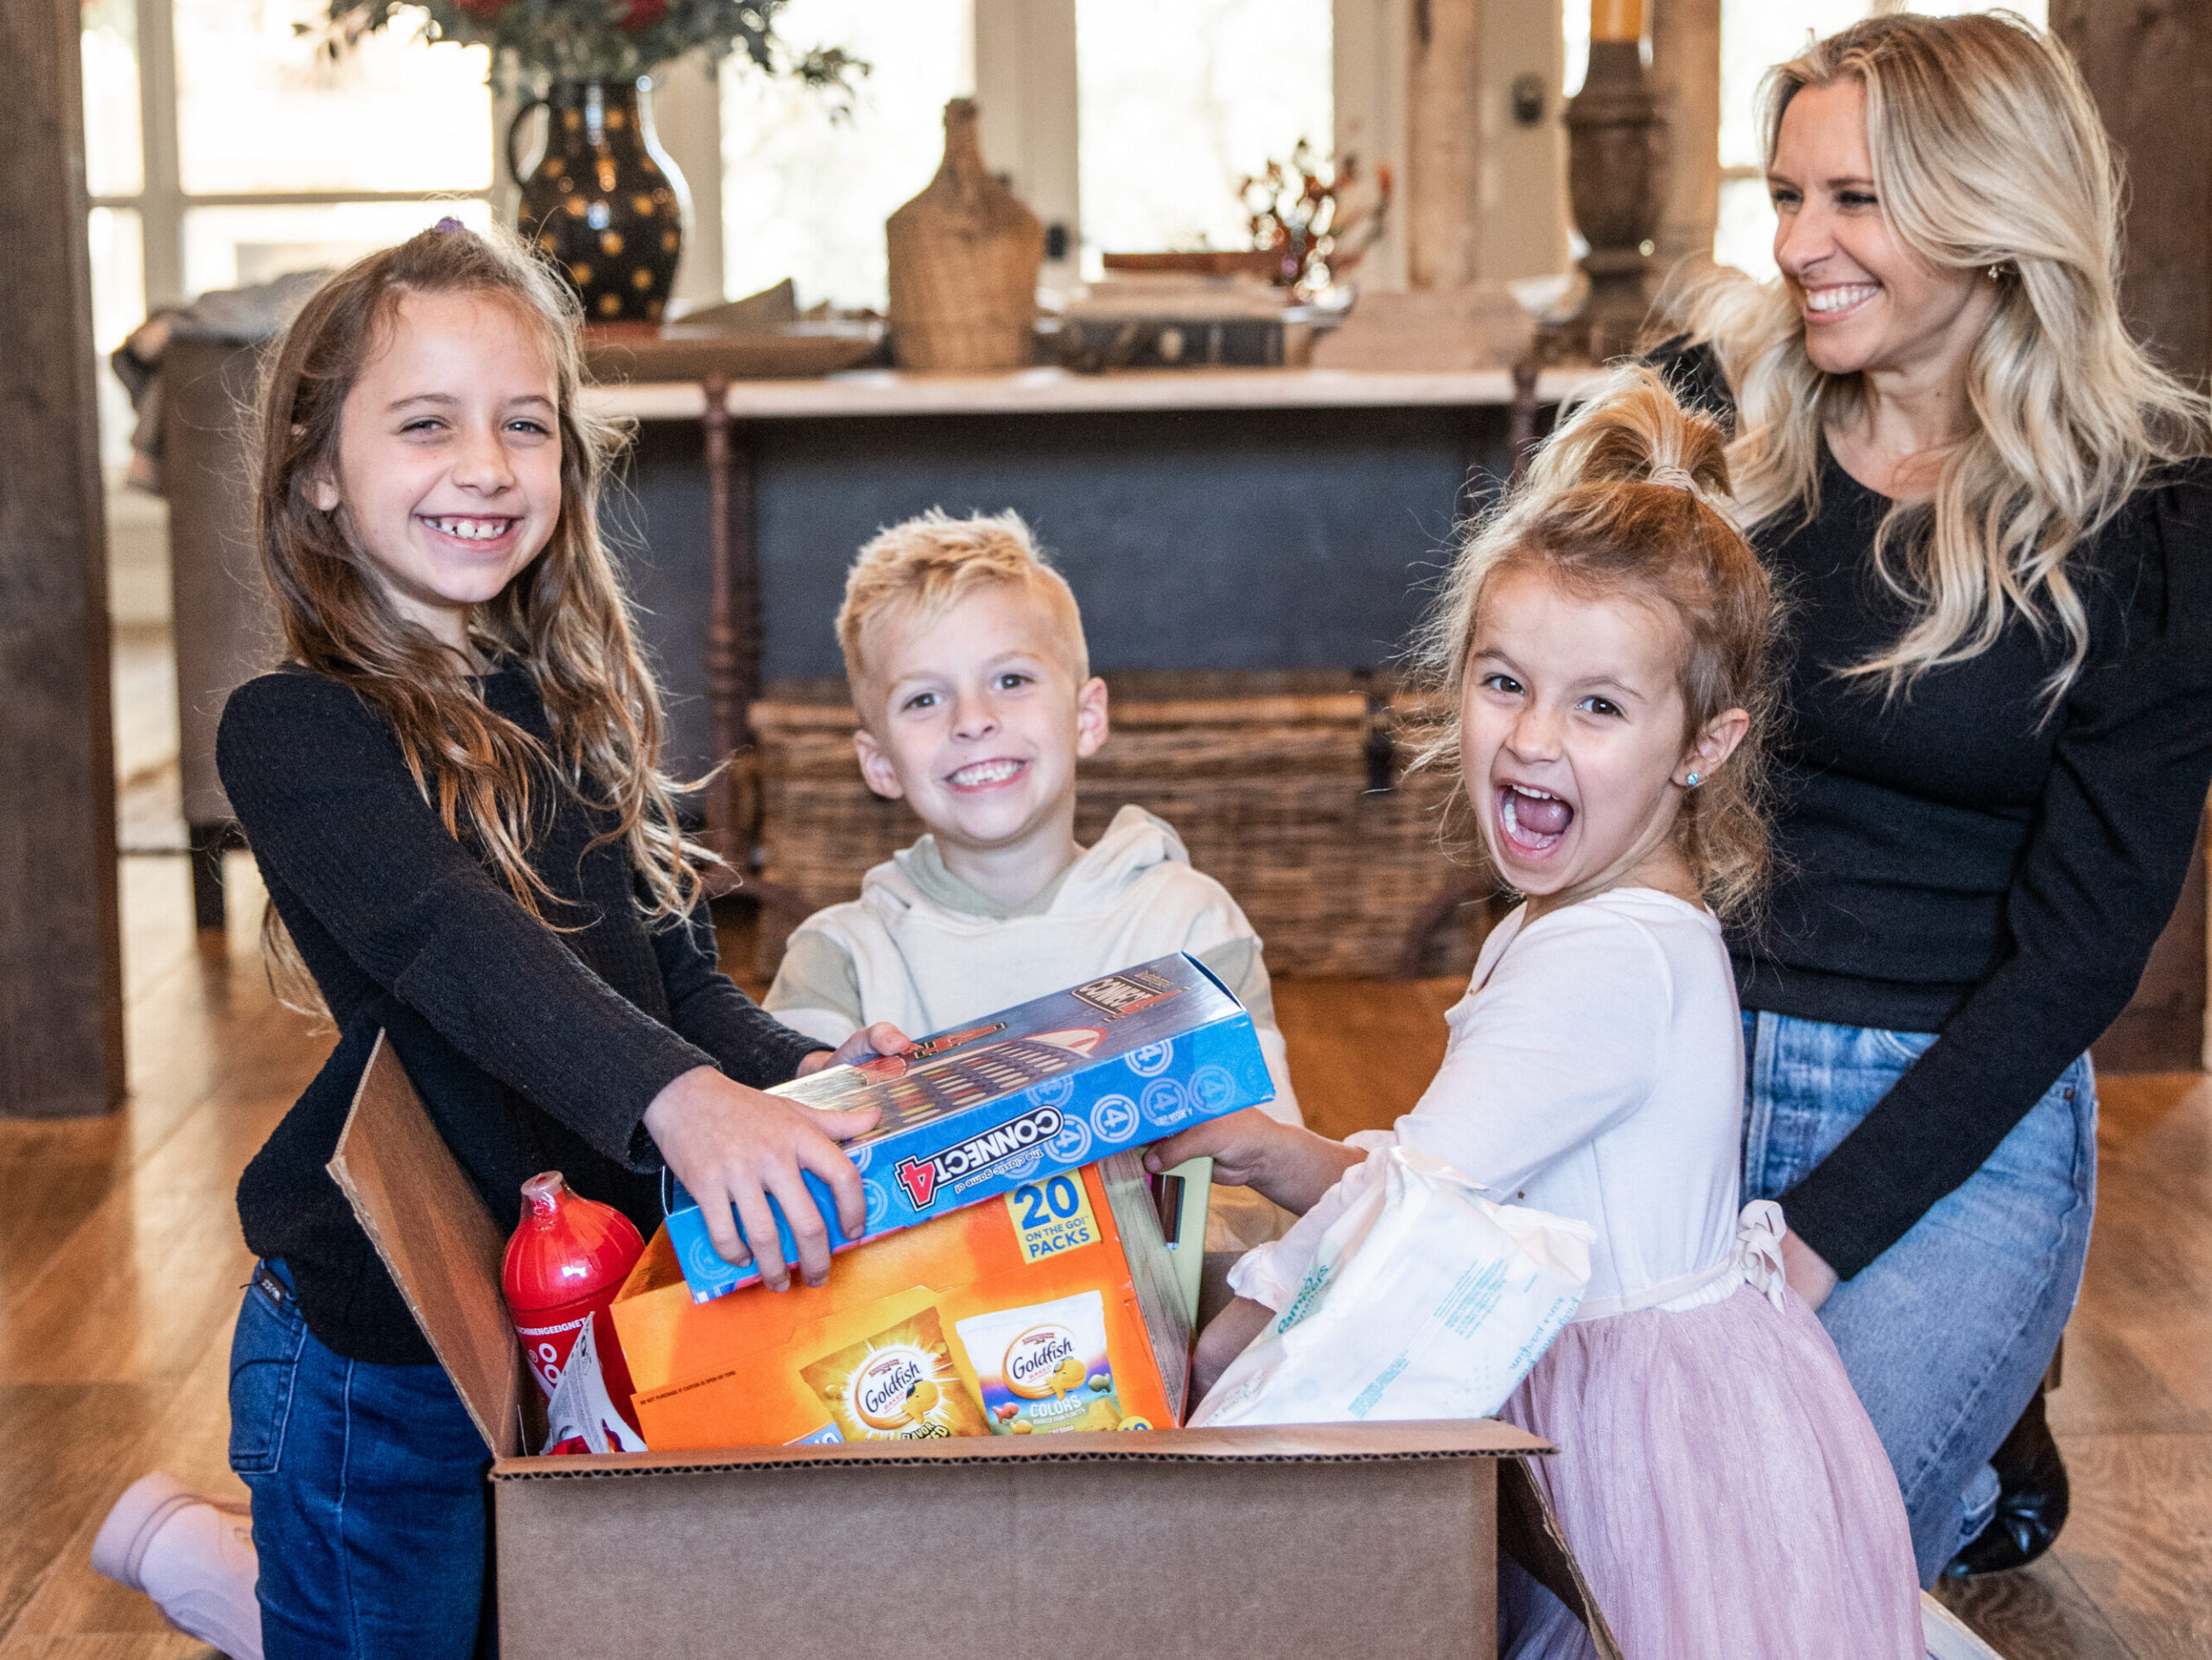 children and a women smiling for a photo as they take toys out of a box